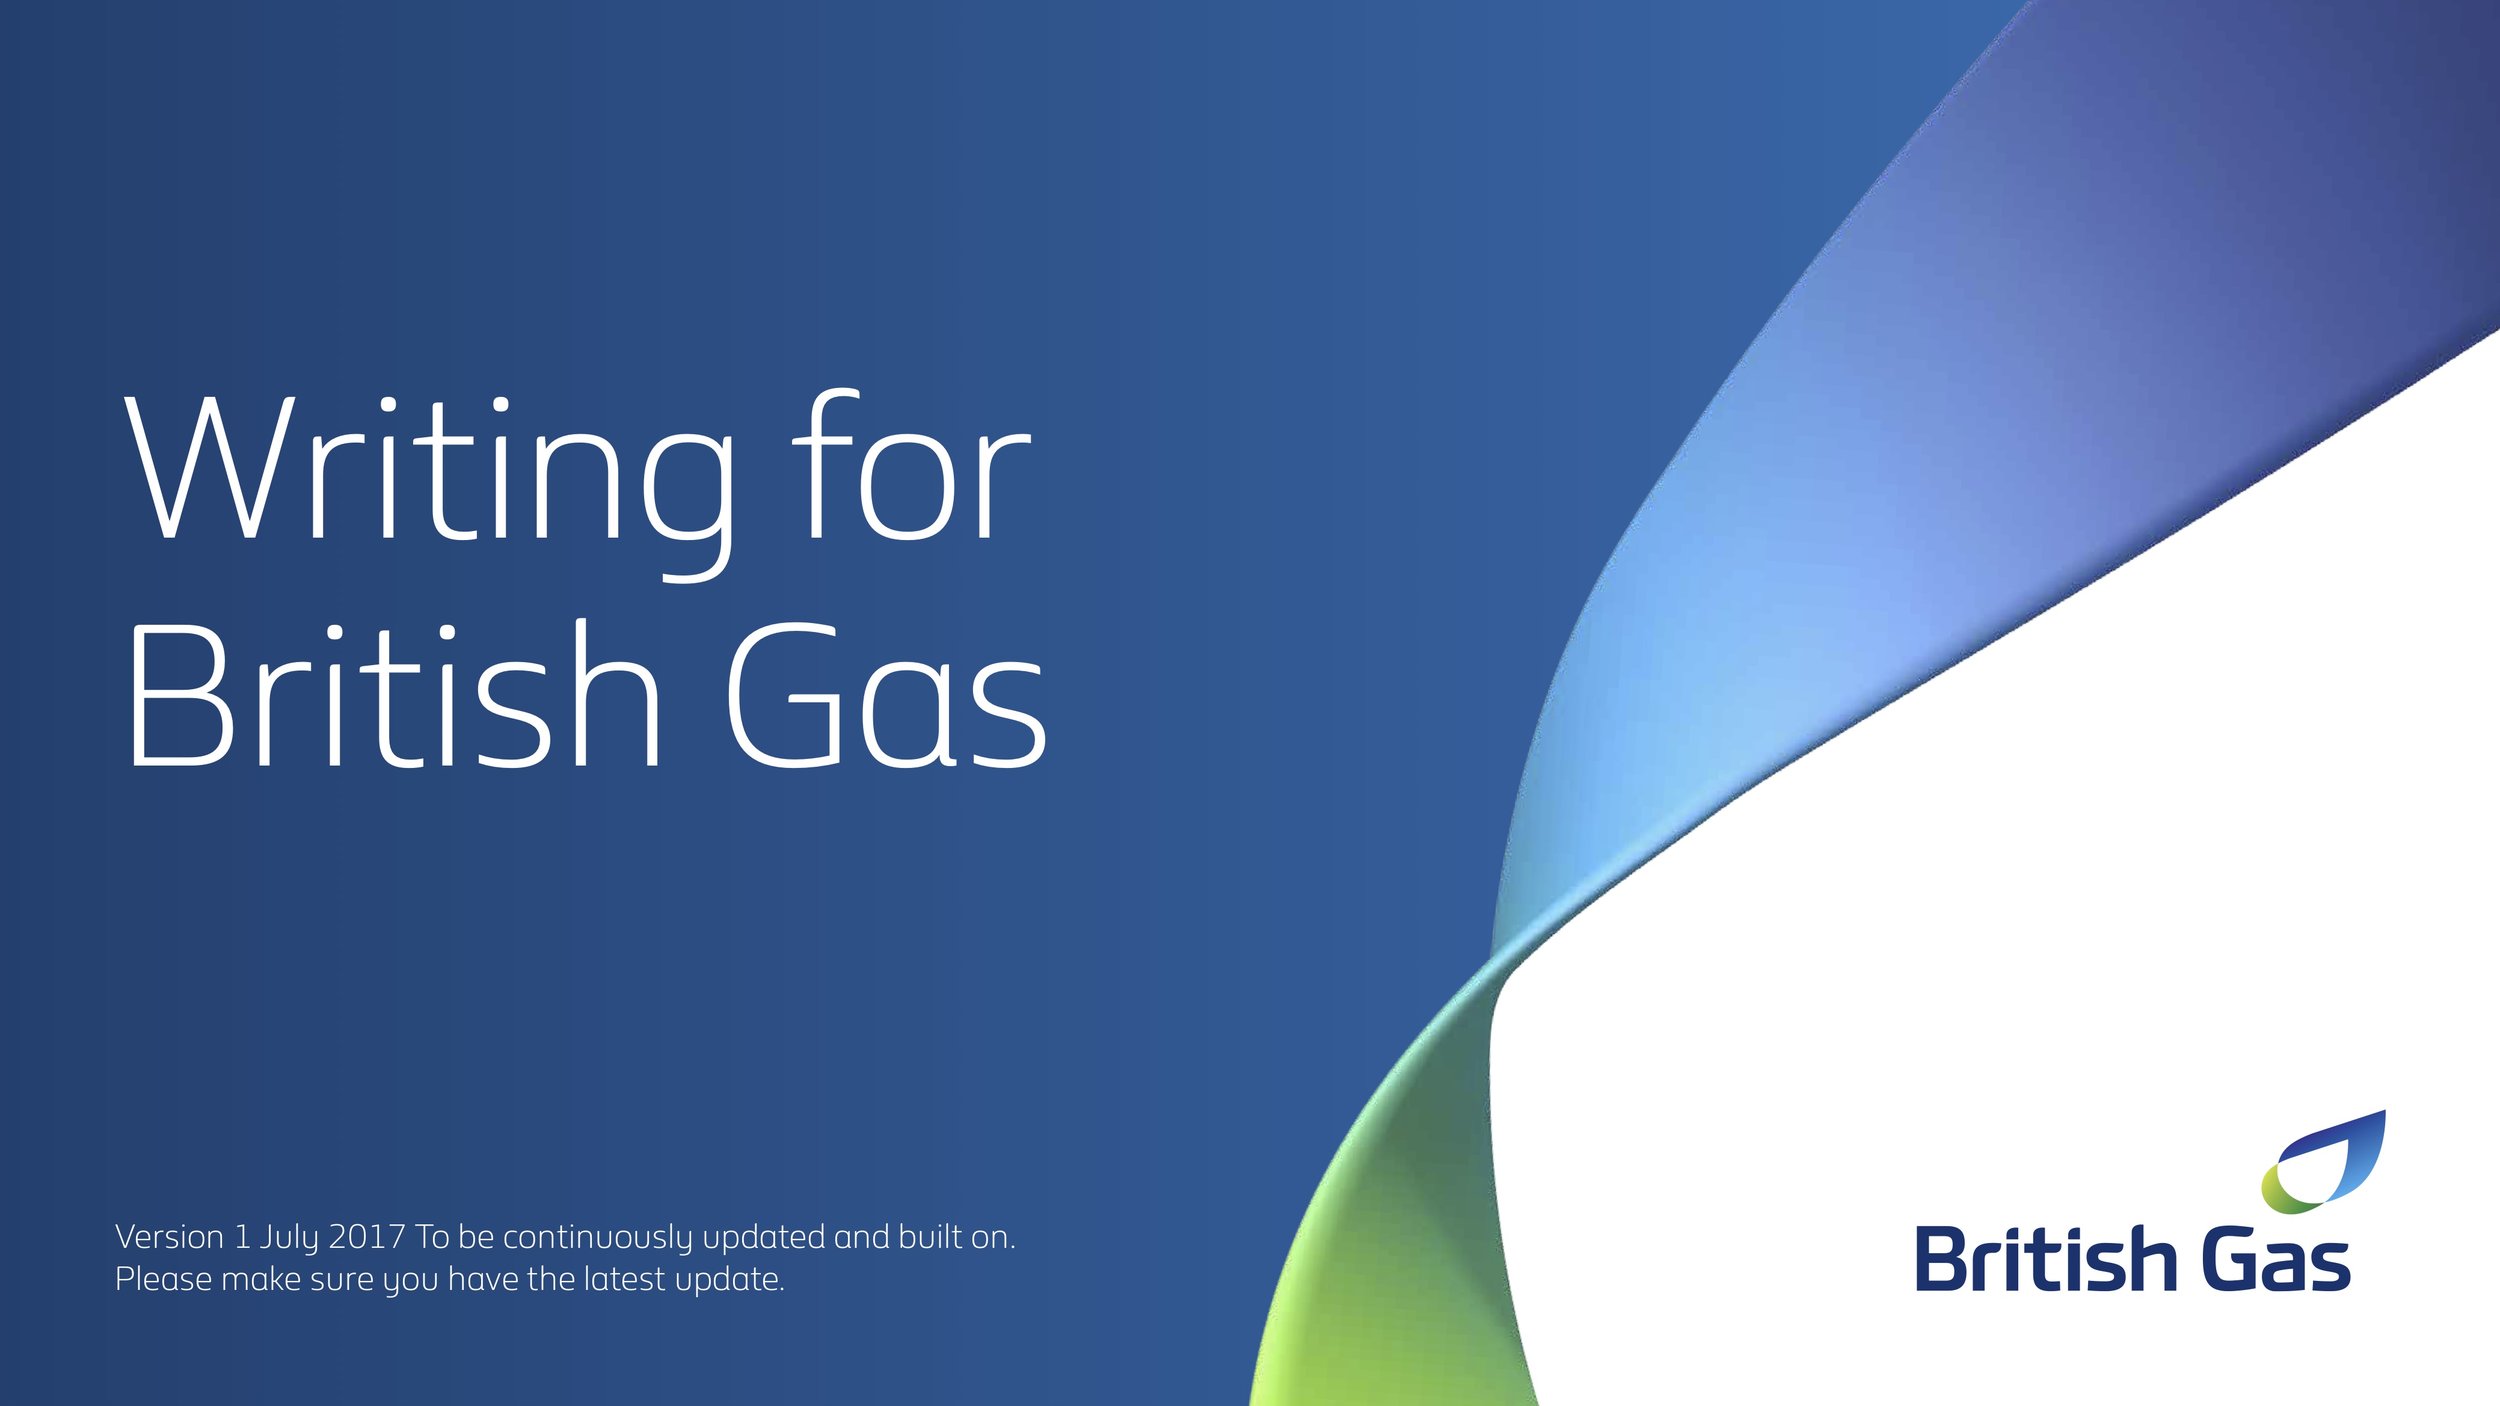 Cover page for British Gas tone of voice guidelines.